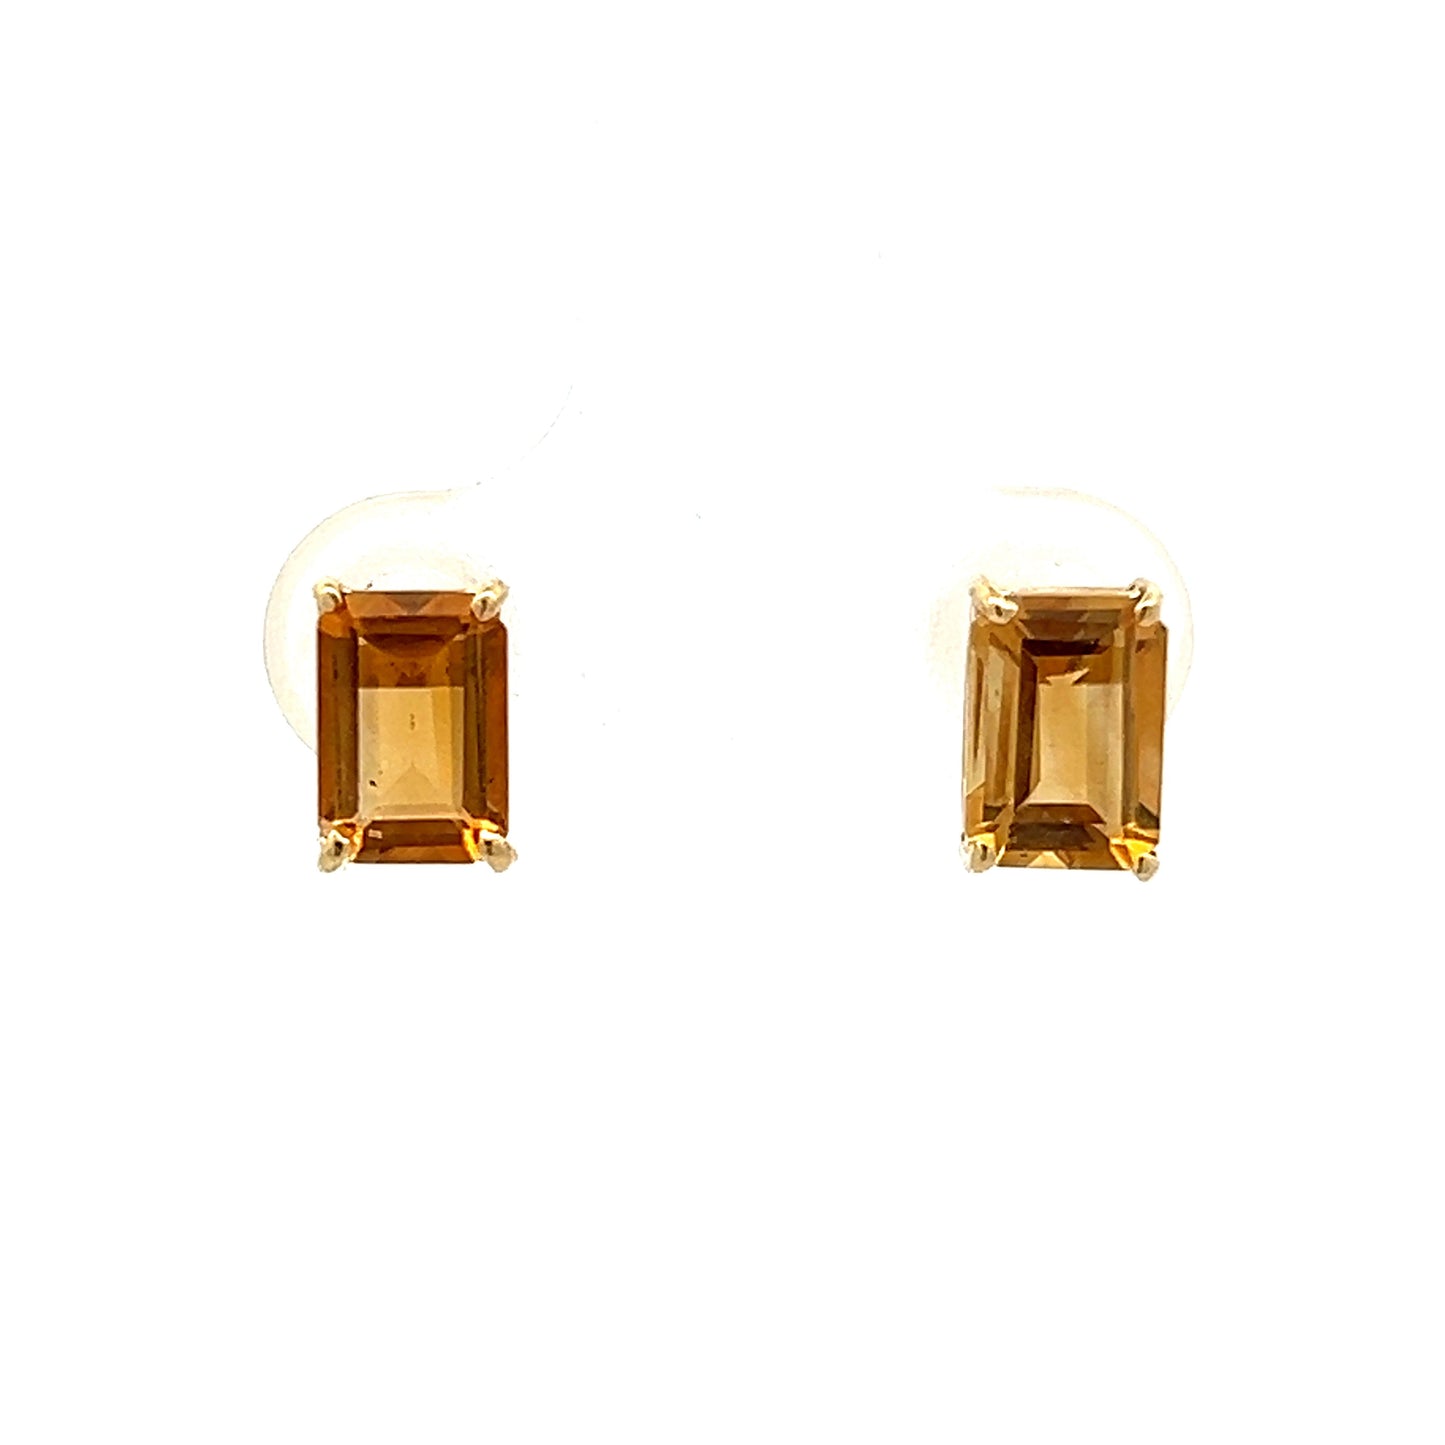 Emerald Cut Citrine Stud Earring in Yellow Gold